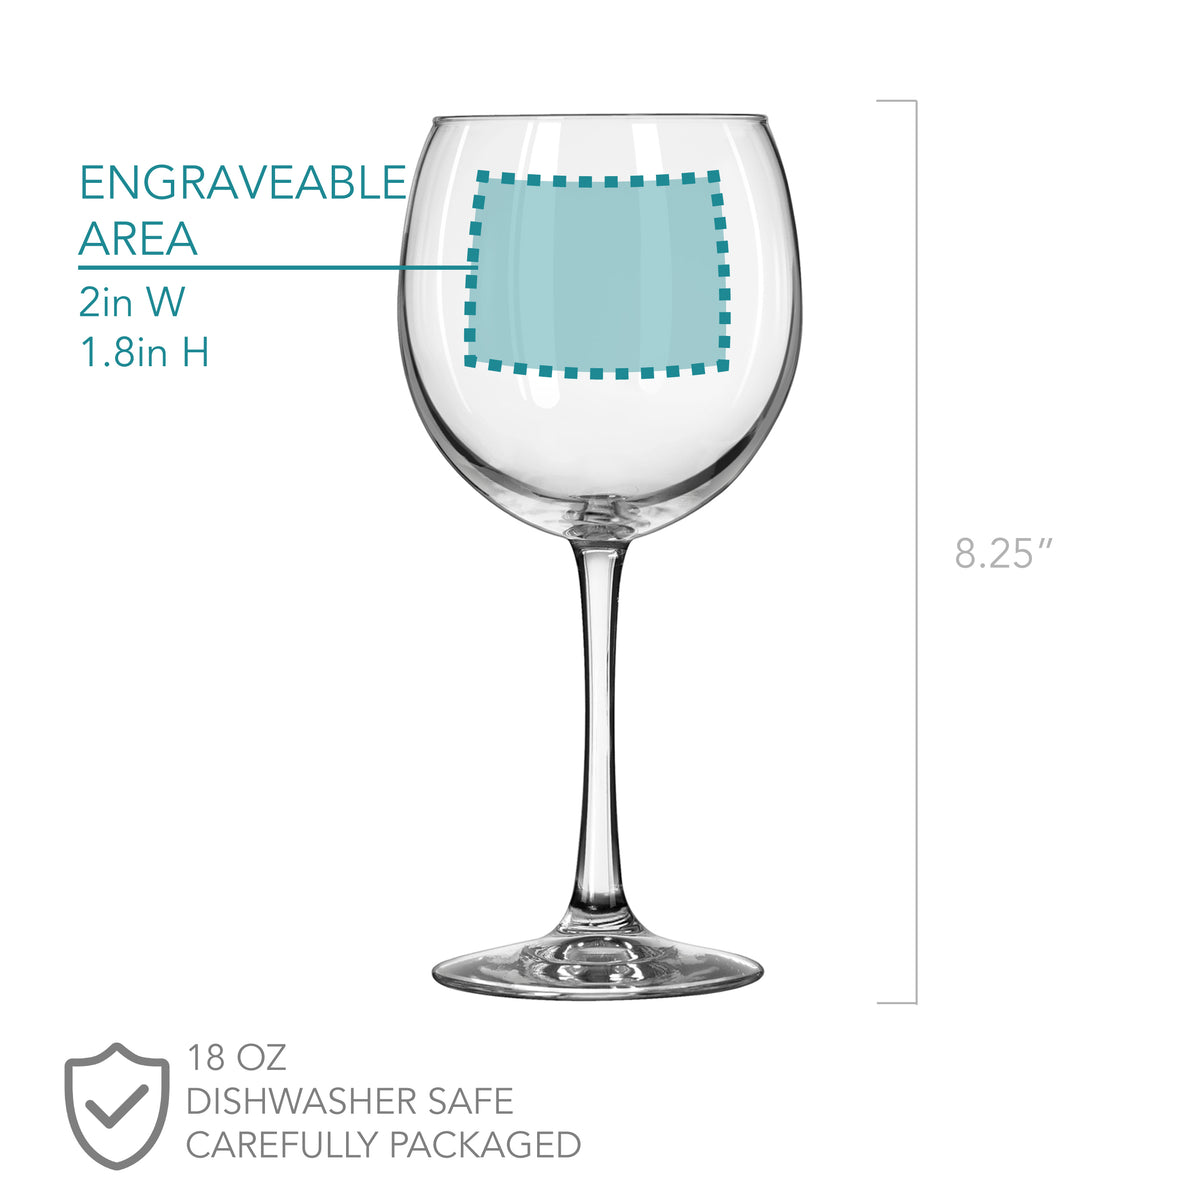 Etched Red Wine Glass I Do Crew - Design: WG6 - Everything Etched